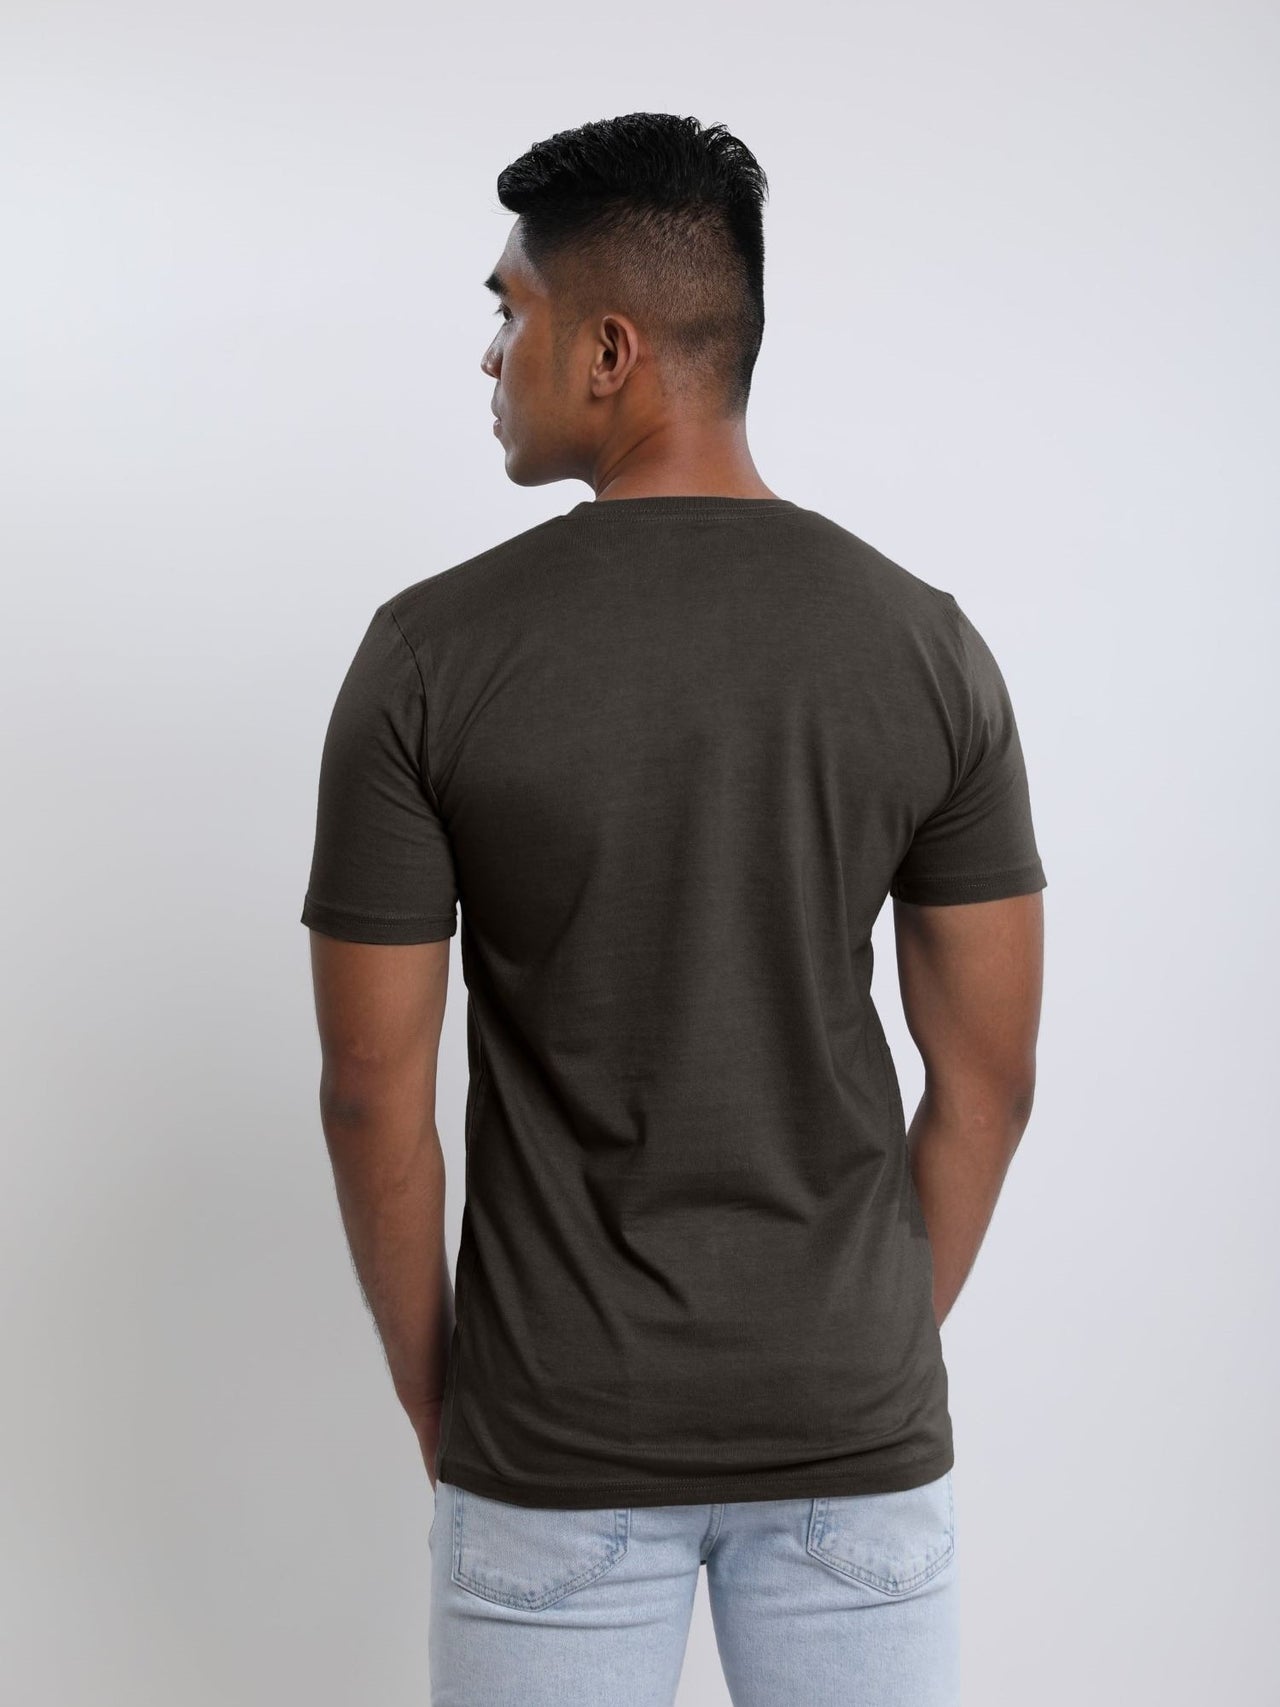 Photo from behind of a tall skinny guy wearing a dark grey tall t-shirt.